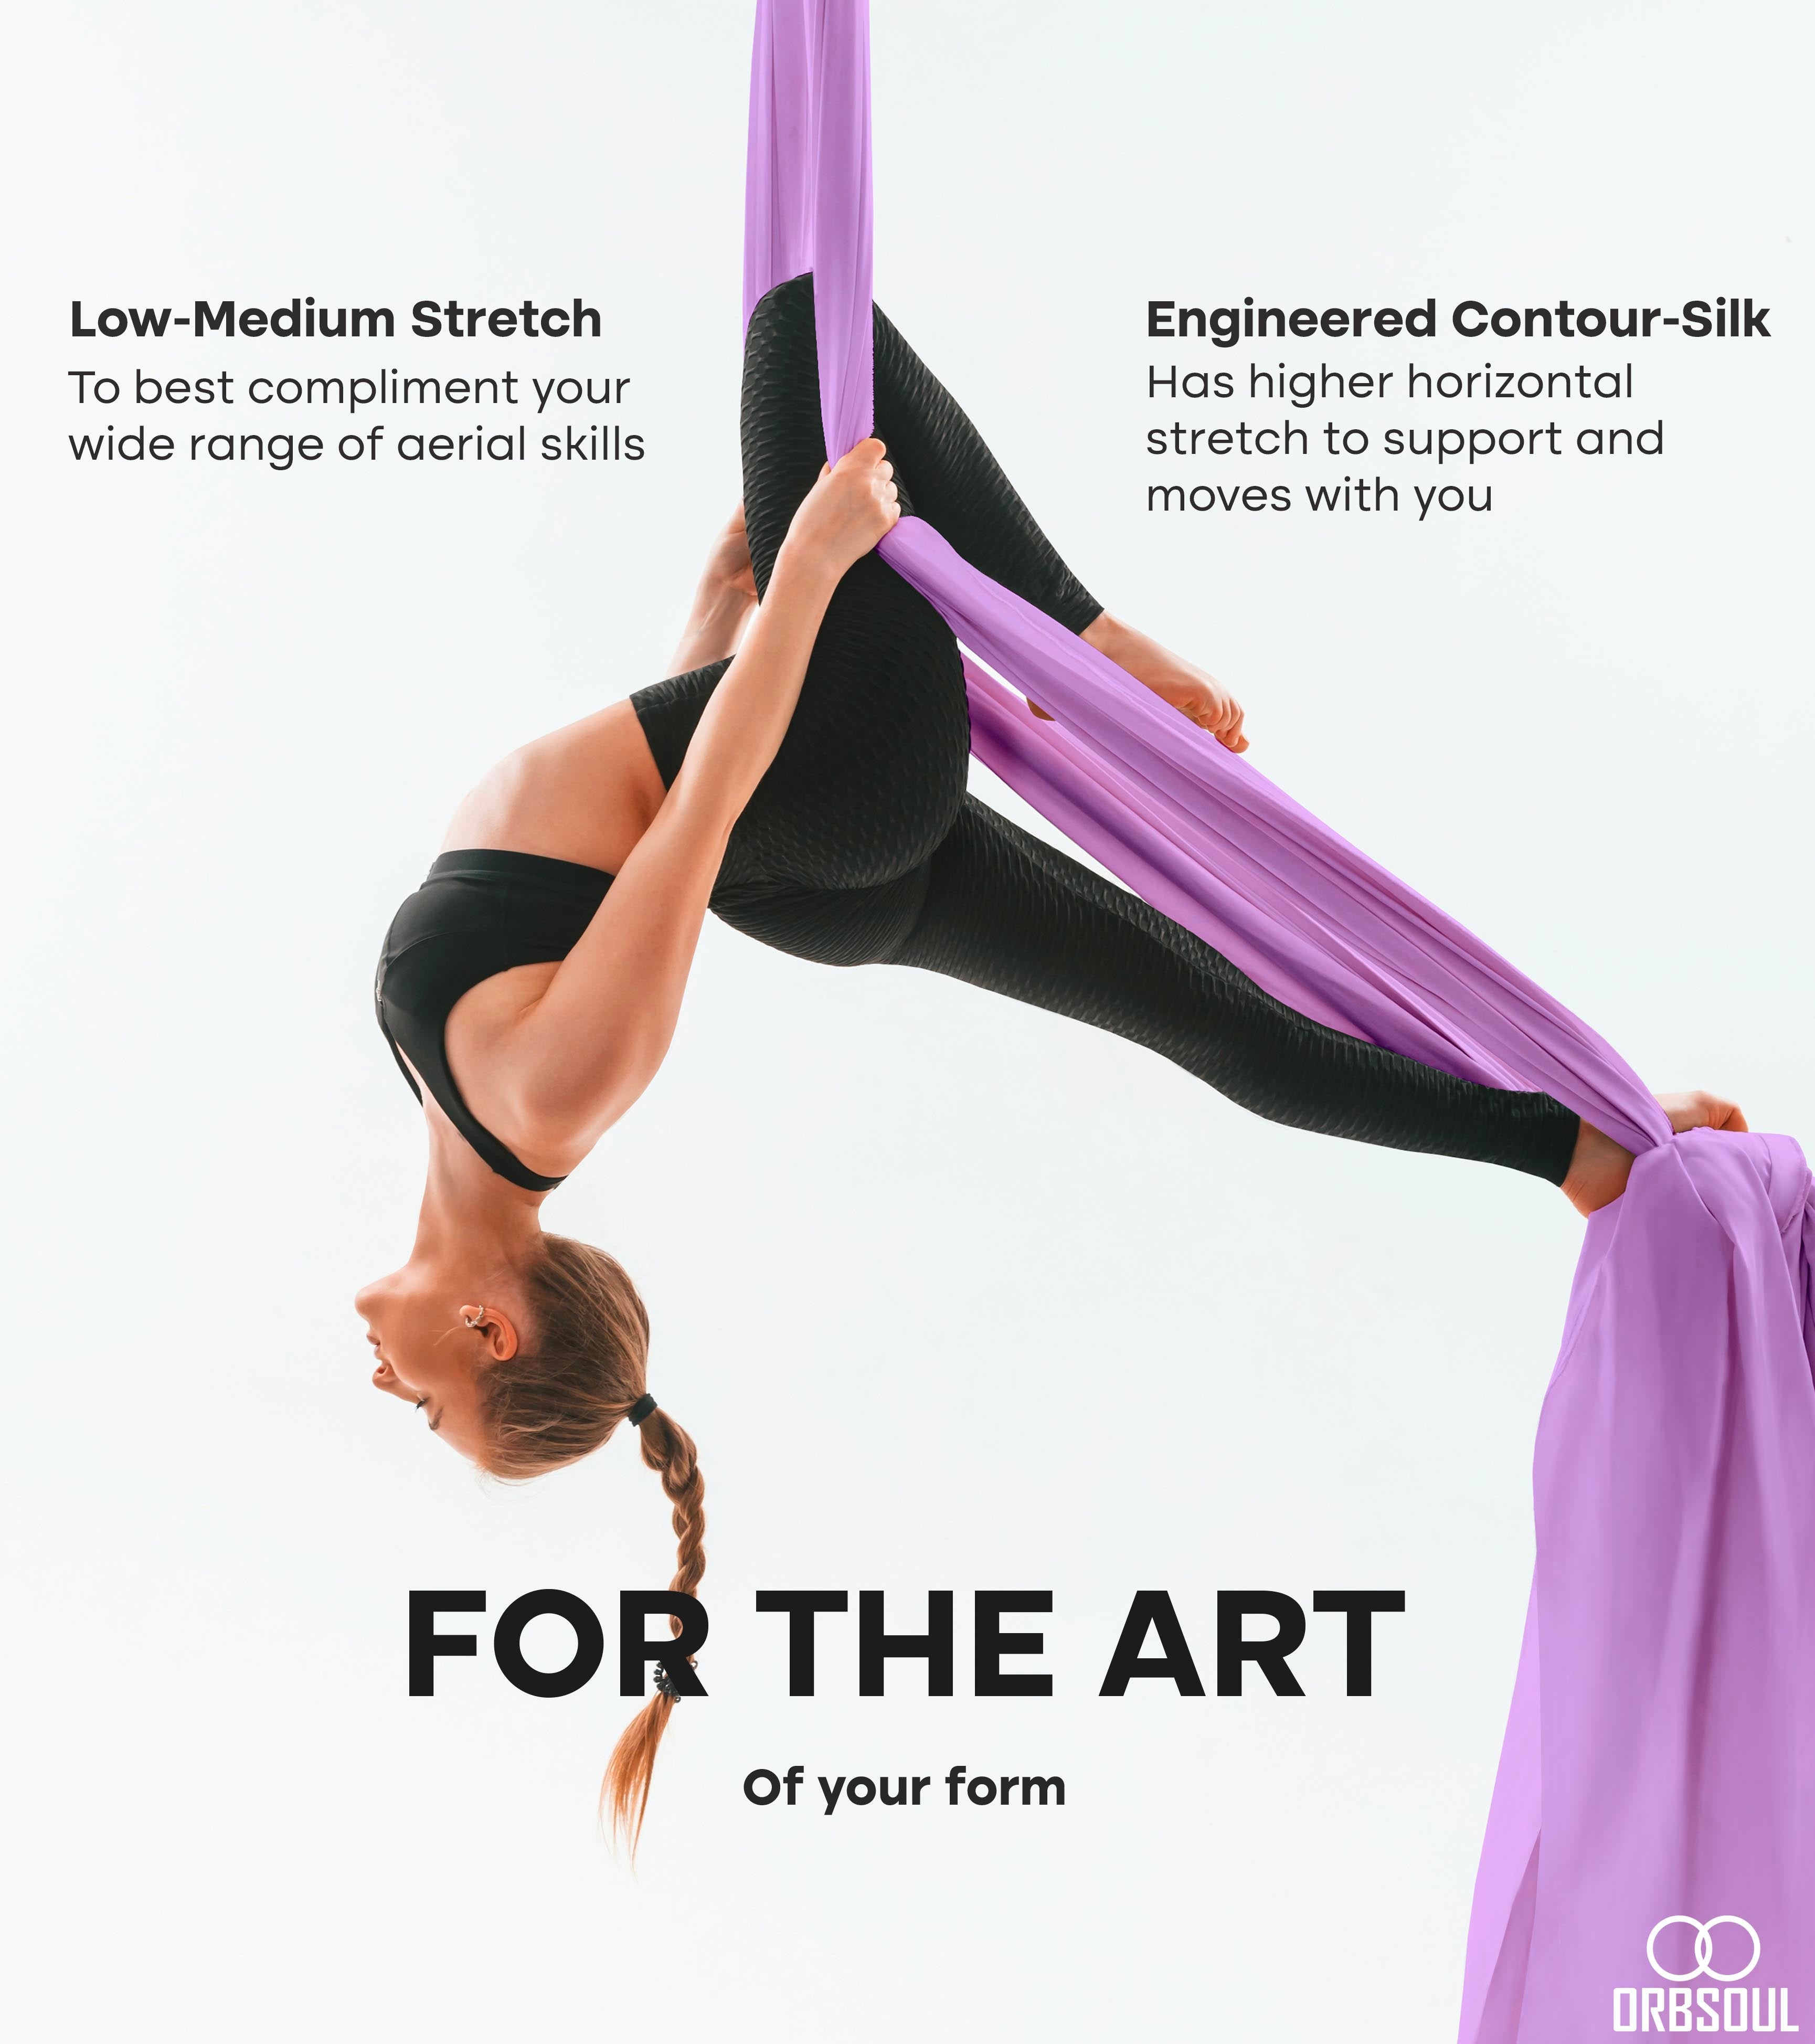 For the art of your form. Low-medium stretch.